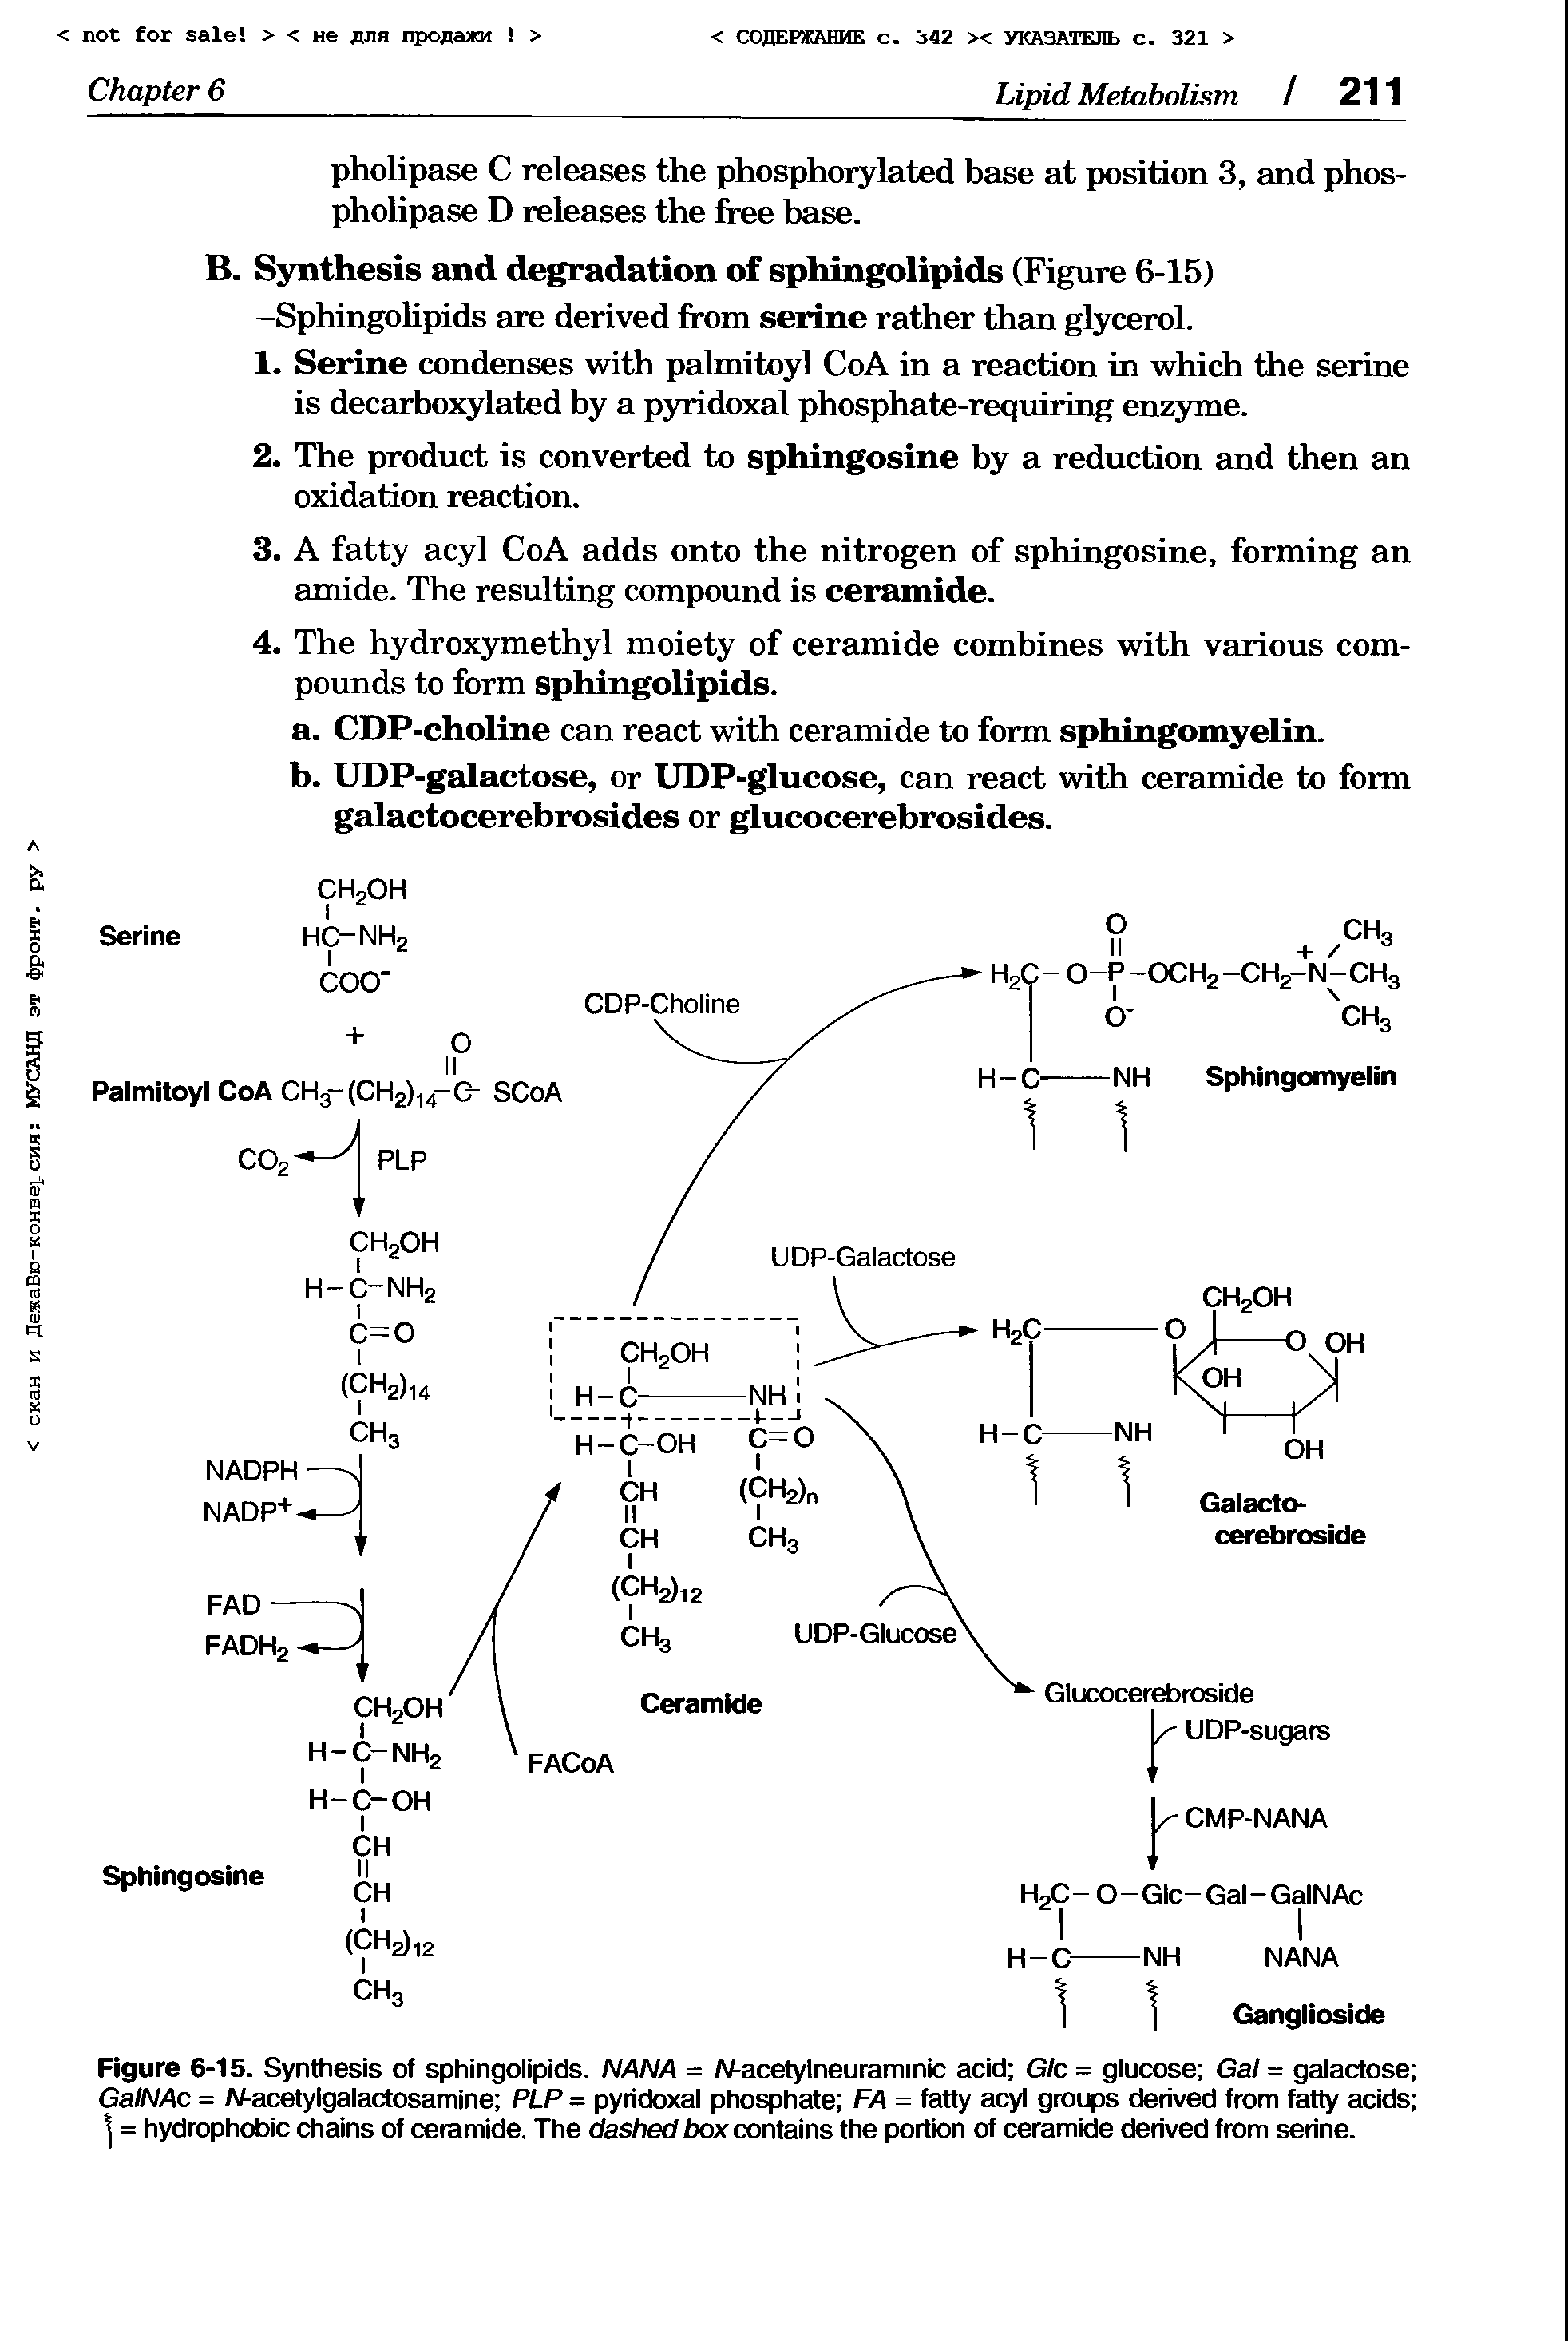 Figure 6-15. Synthesis of sphingolipids. NANA = W-acetylneuraminic acid G/c = glucose Gal = galactose GalNAc = N-acetylgalactosamine PIP = pyridoxal phosphate FA = fatty acyl groups derived from fatty acids = hydrophobic chains of ceramide. The dashed box contains the portion of ceramide derived from serine.